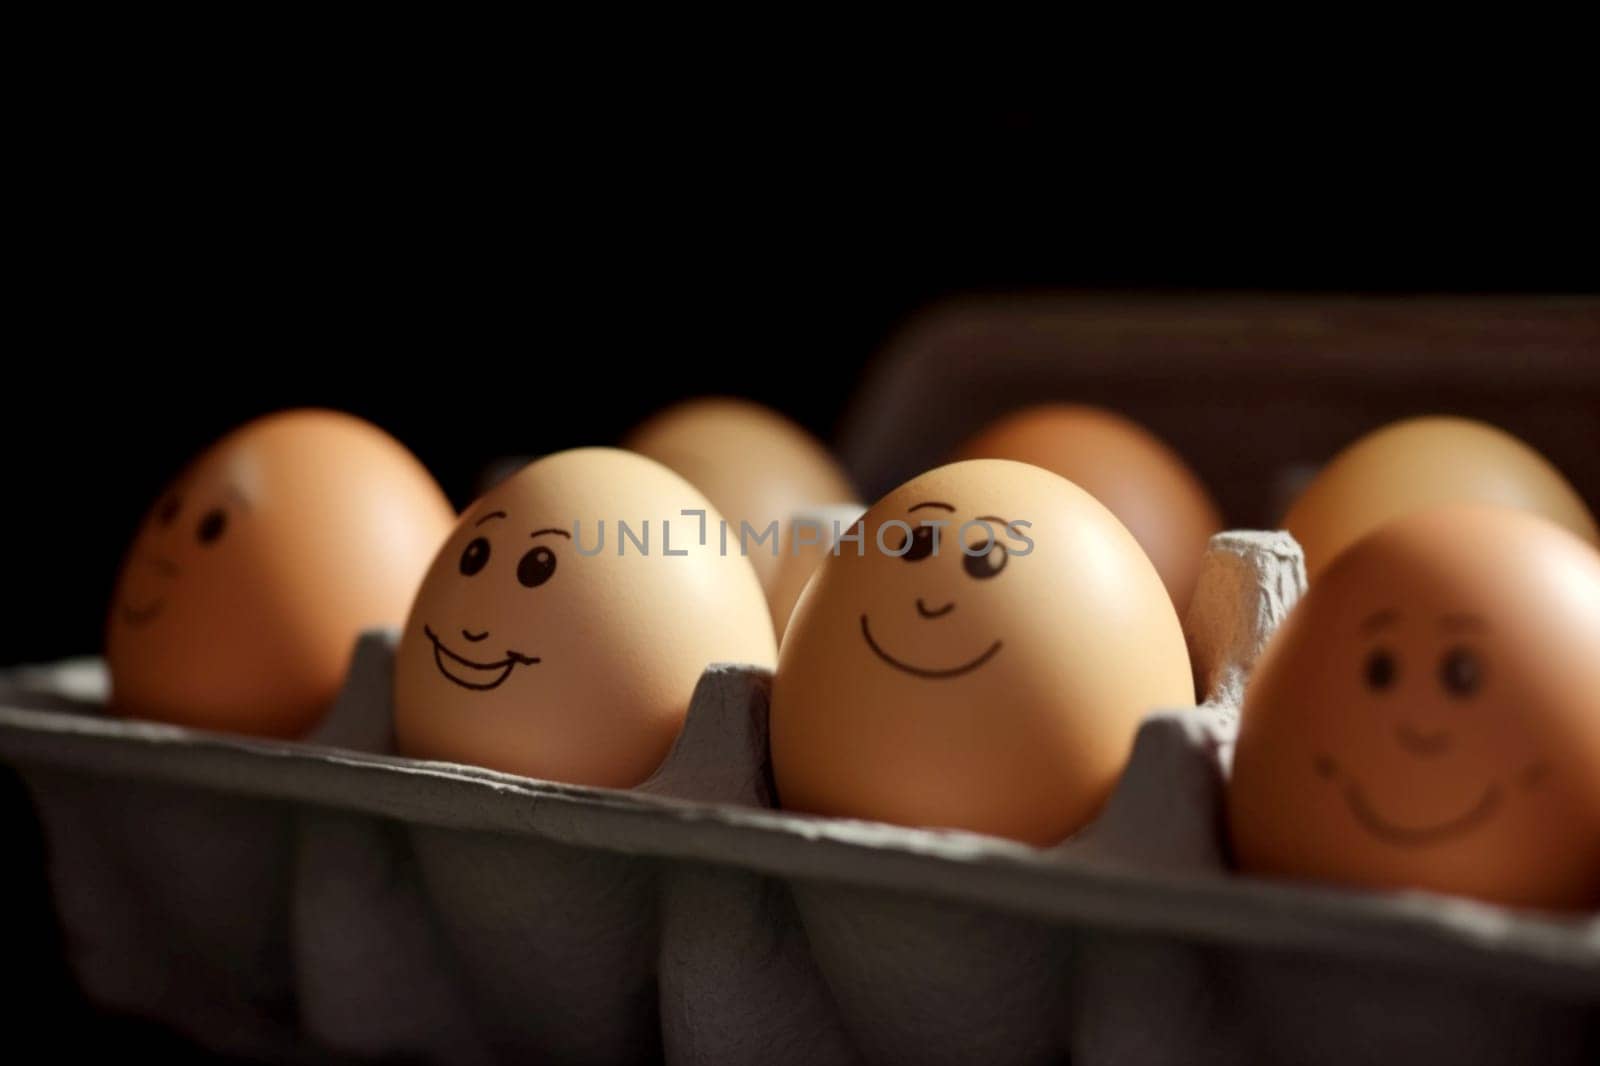 group of eggs in a carton with smiles on their faces